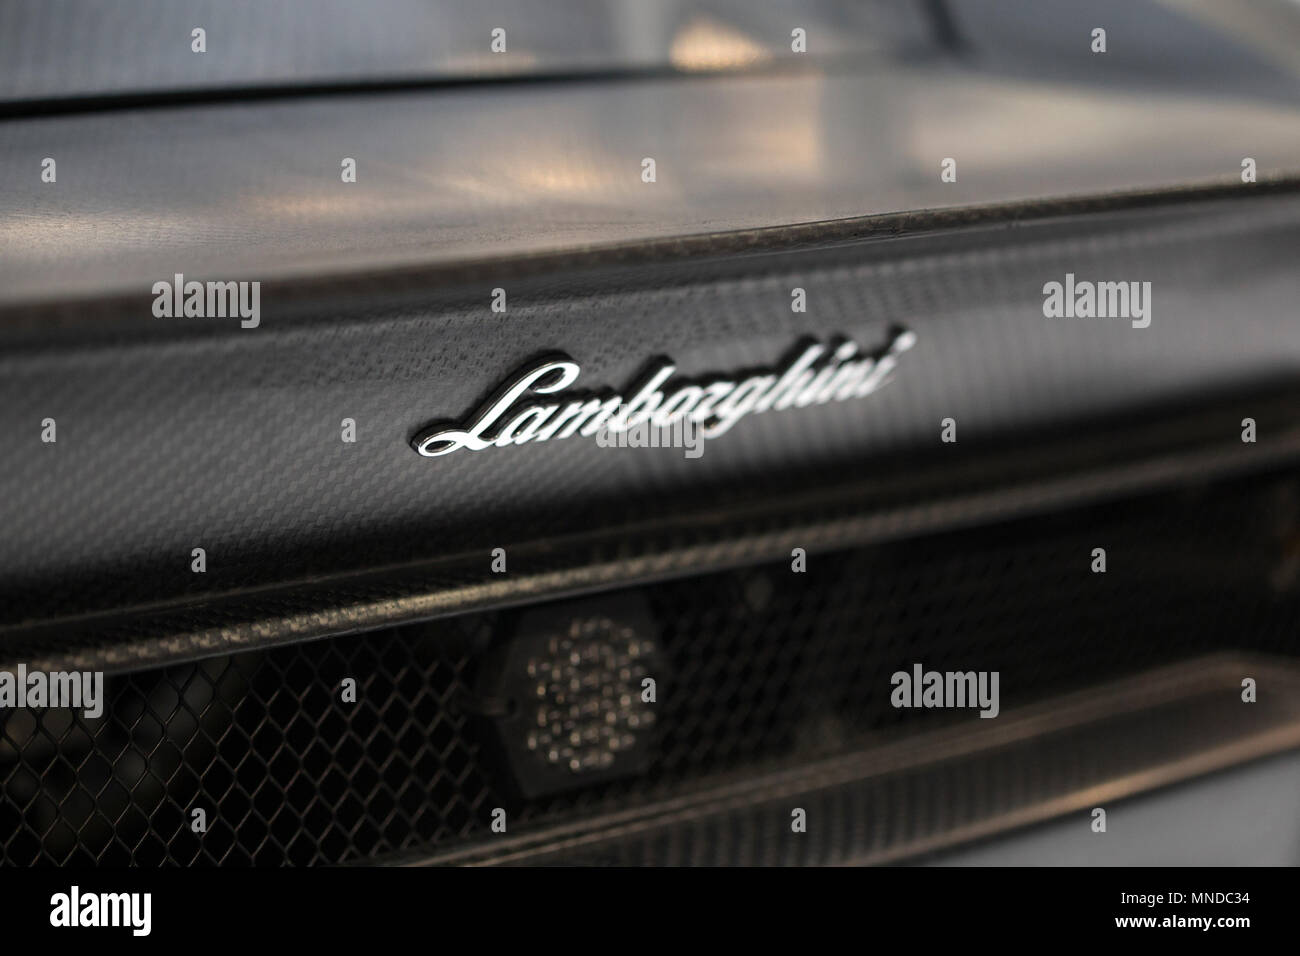 Automobili Lamborghini S.p.A. is a famous Italian brand and manufacturer of luxury supercars based in Sant'Agata Bolognese, Italy. Stock Photo